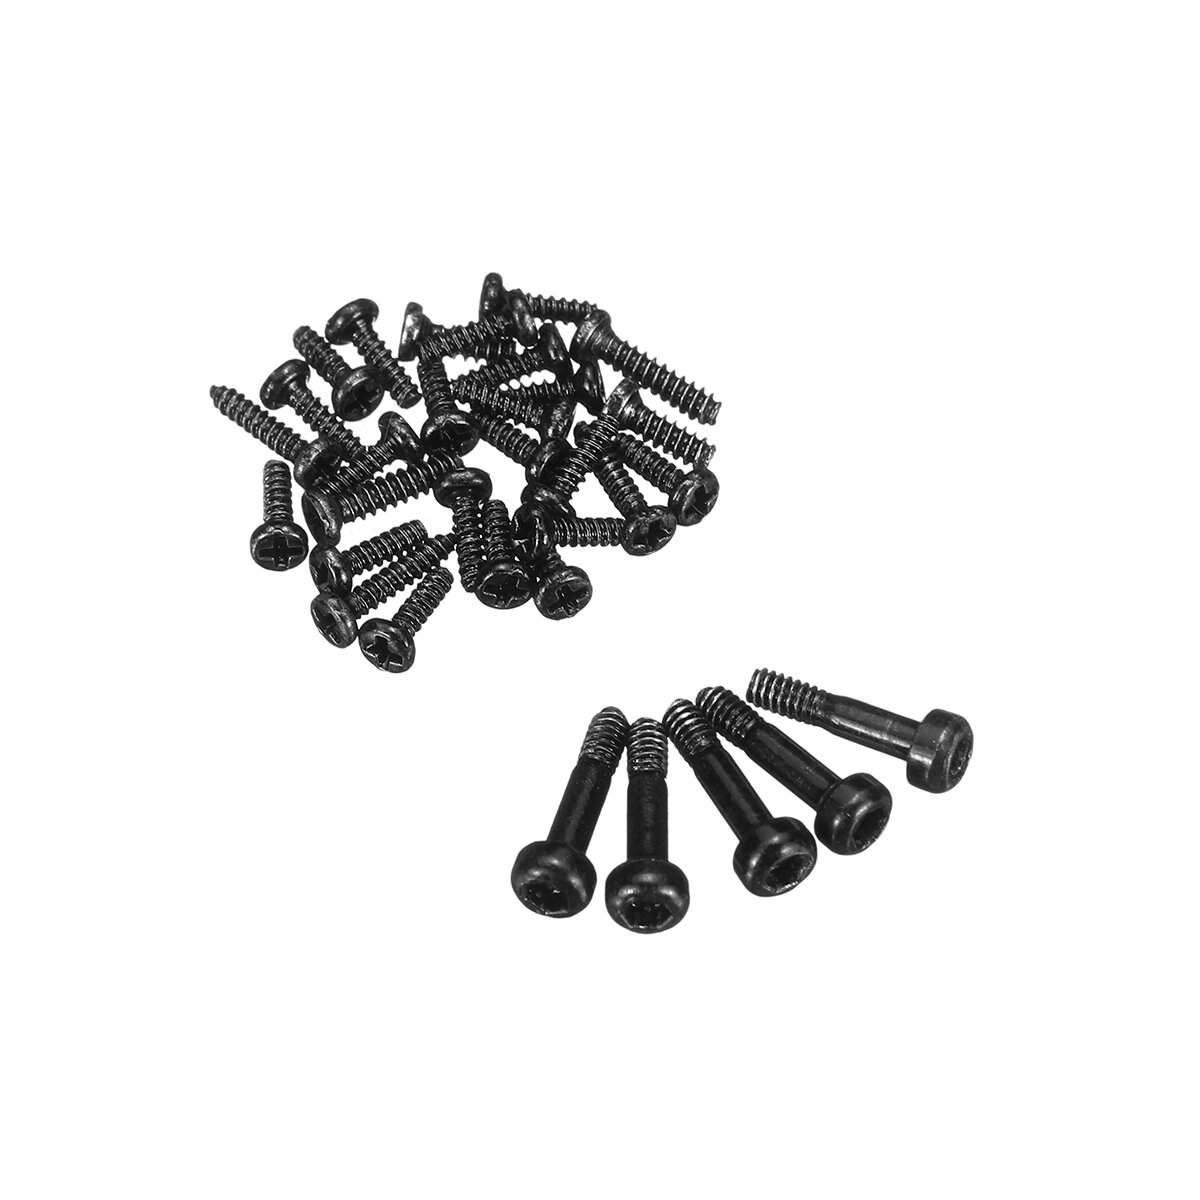 Eachine E120 Screw Set RC Helicopter Parts